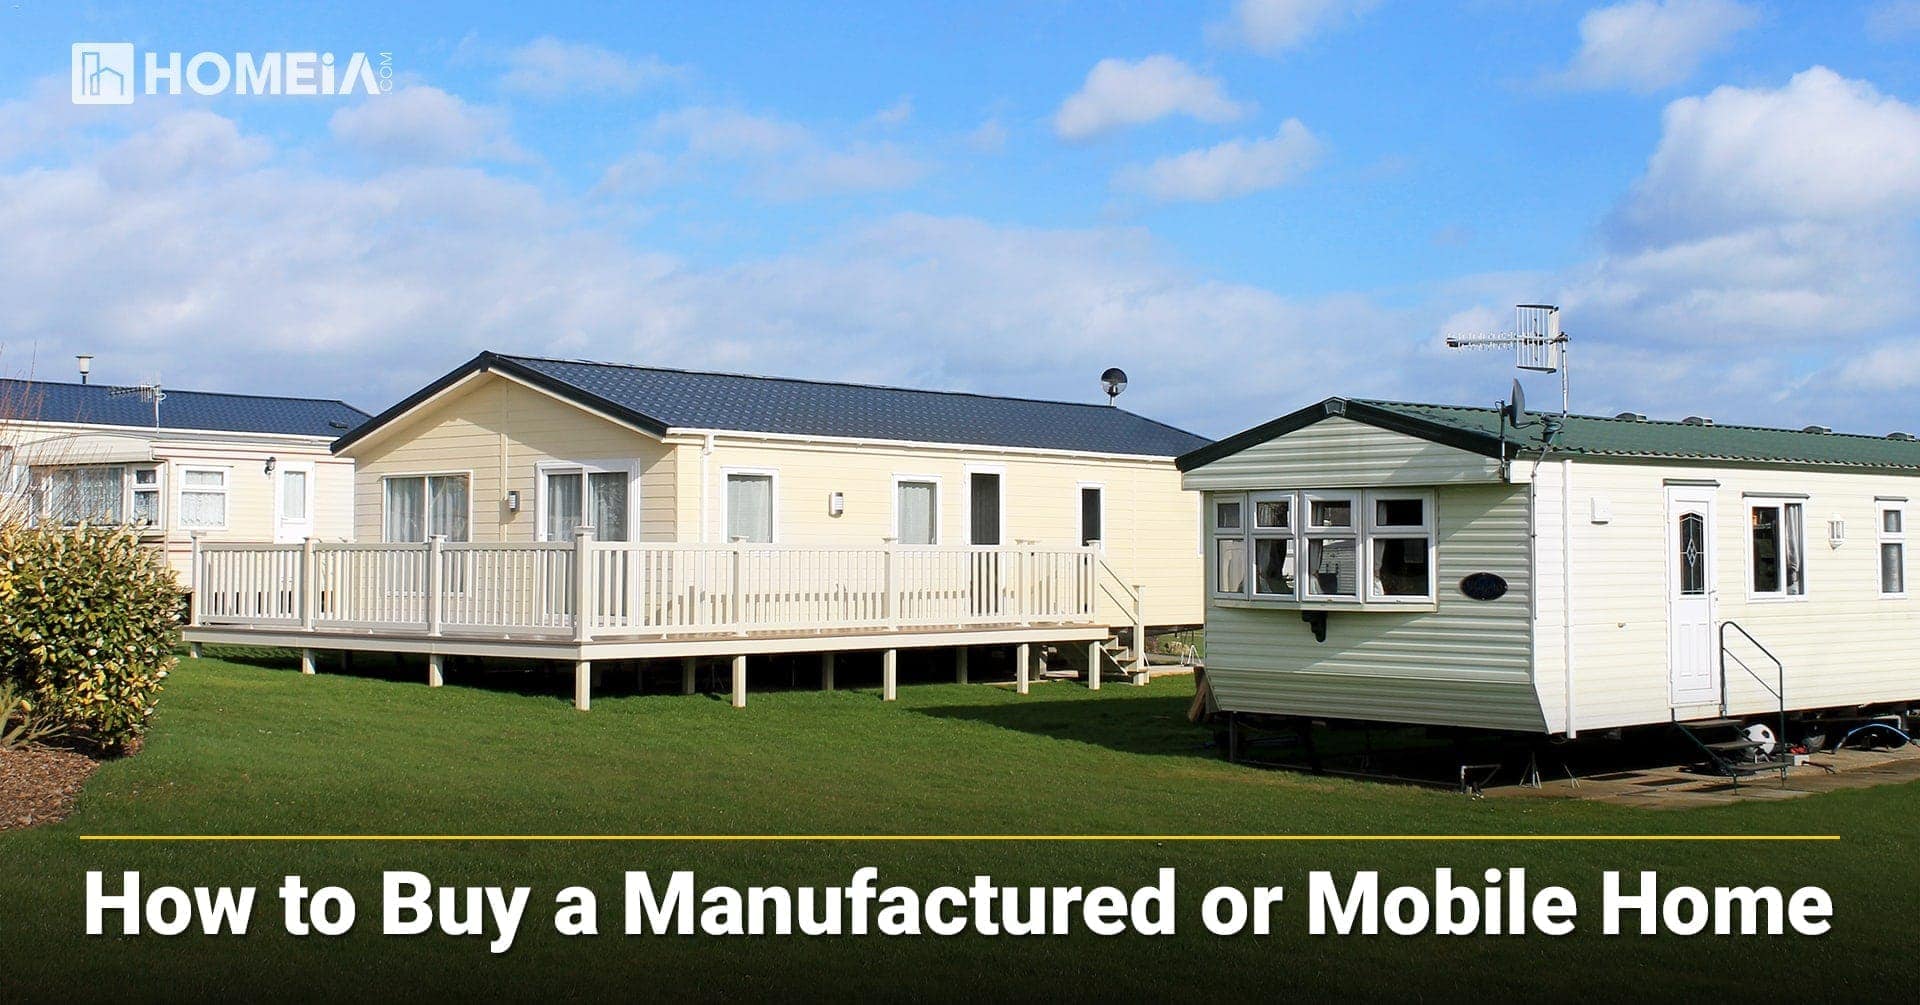 20 Key Things to Know Before Buying a Mobile Home   HOMEiA